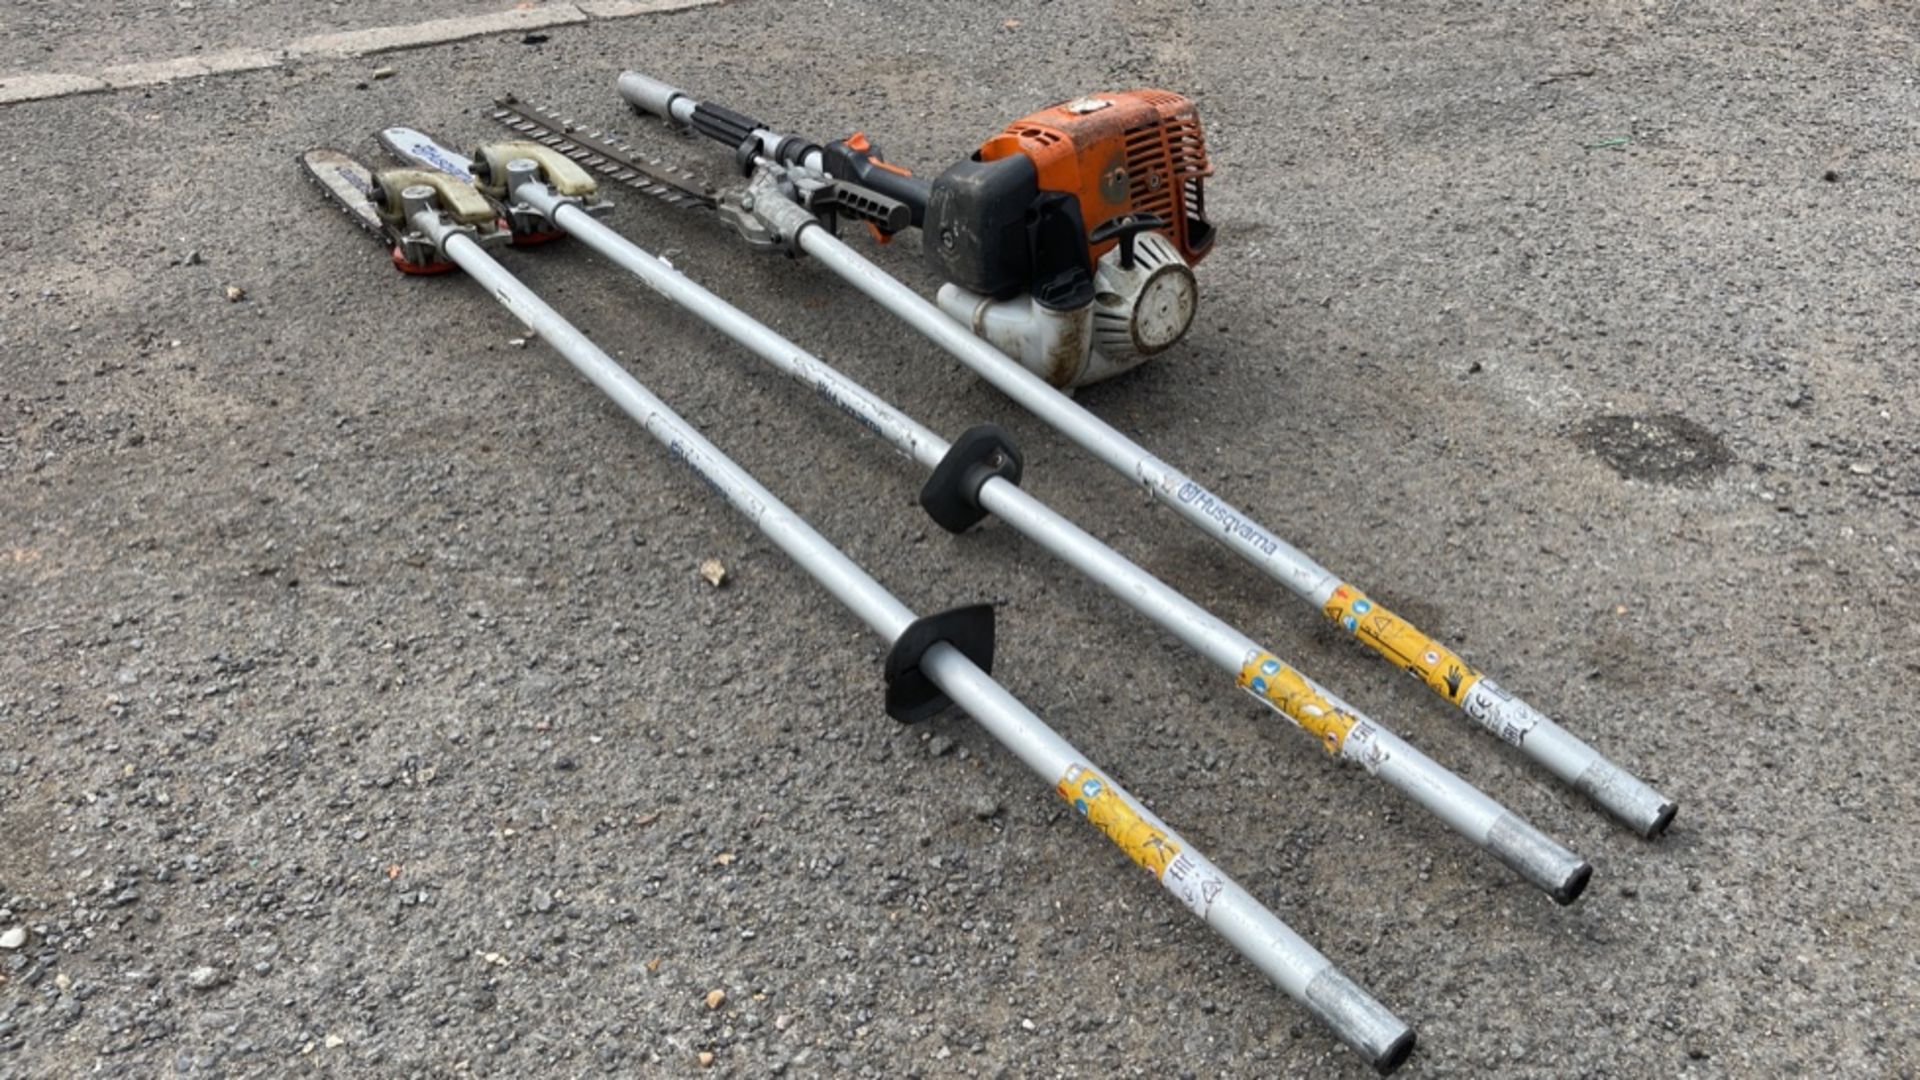 STIHL LONG REACH PETROL TRIMMER WITH ATTACHED HEADS *NON-RUNNER - FOR SPARES OR REPAIR ONLY* - Image 2 of 6